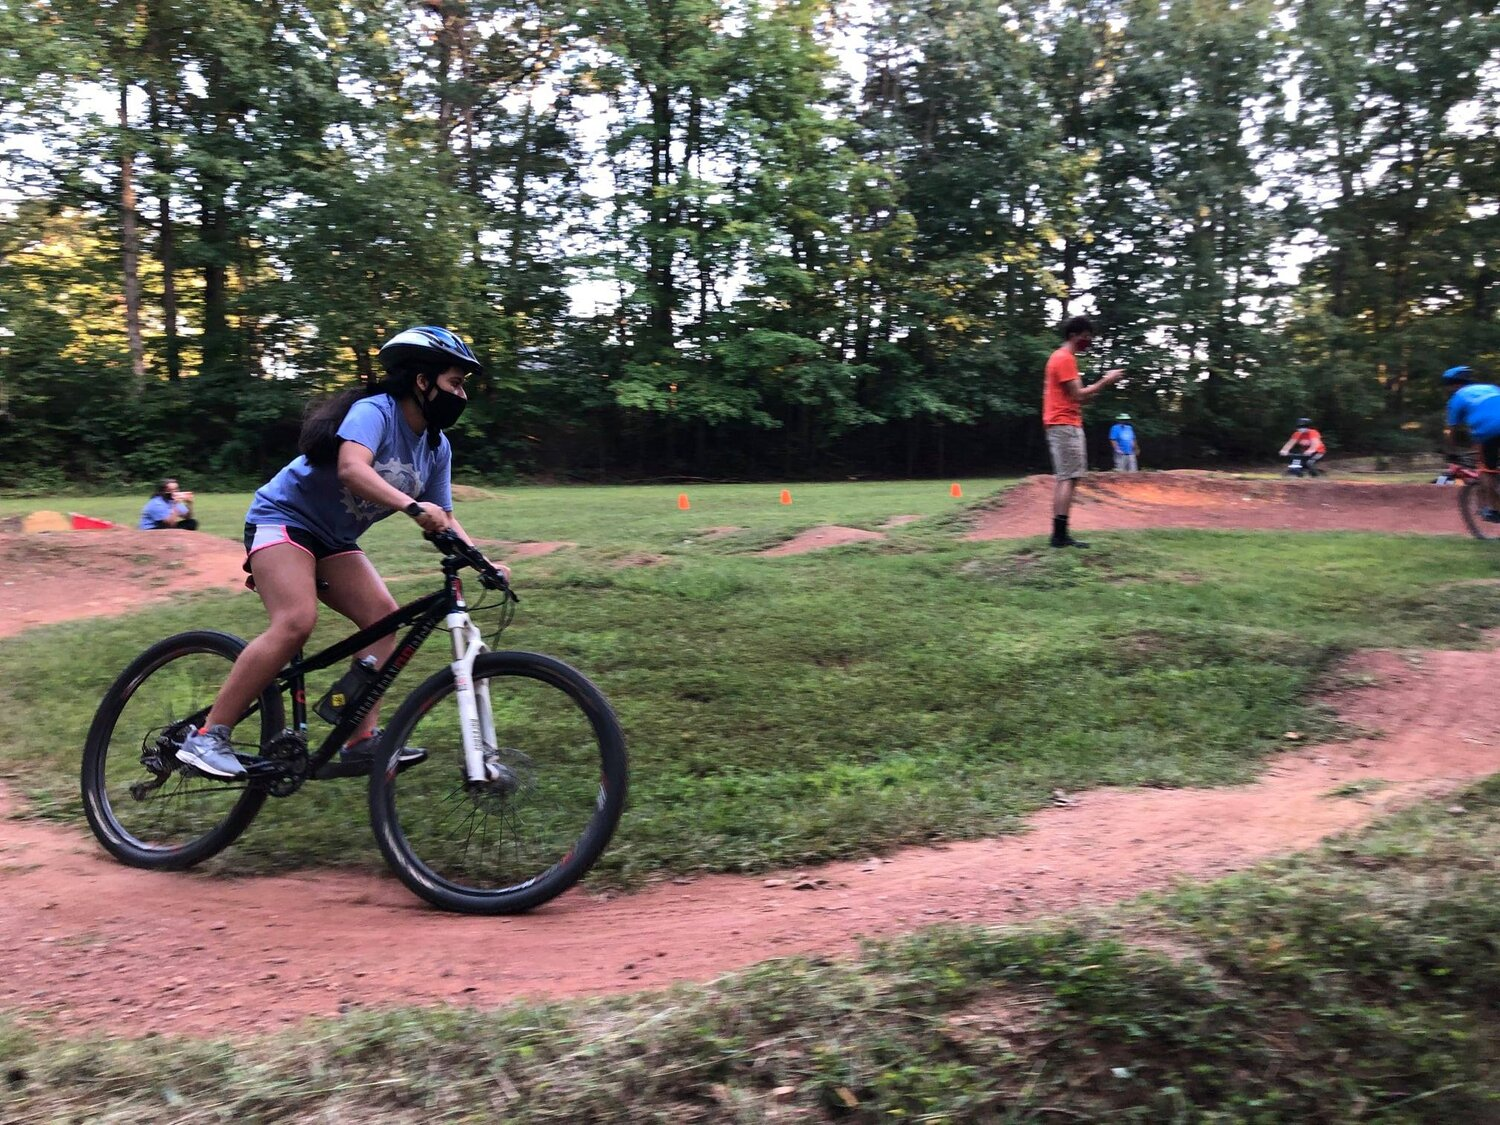 Young girl shows off some serious skill on a mountain bike